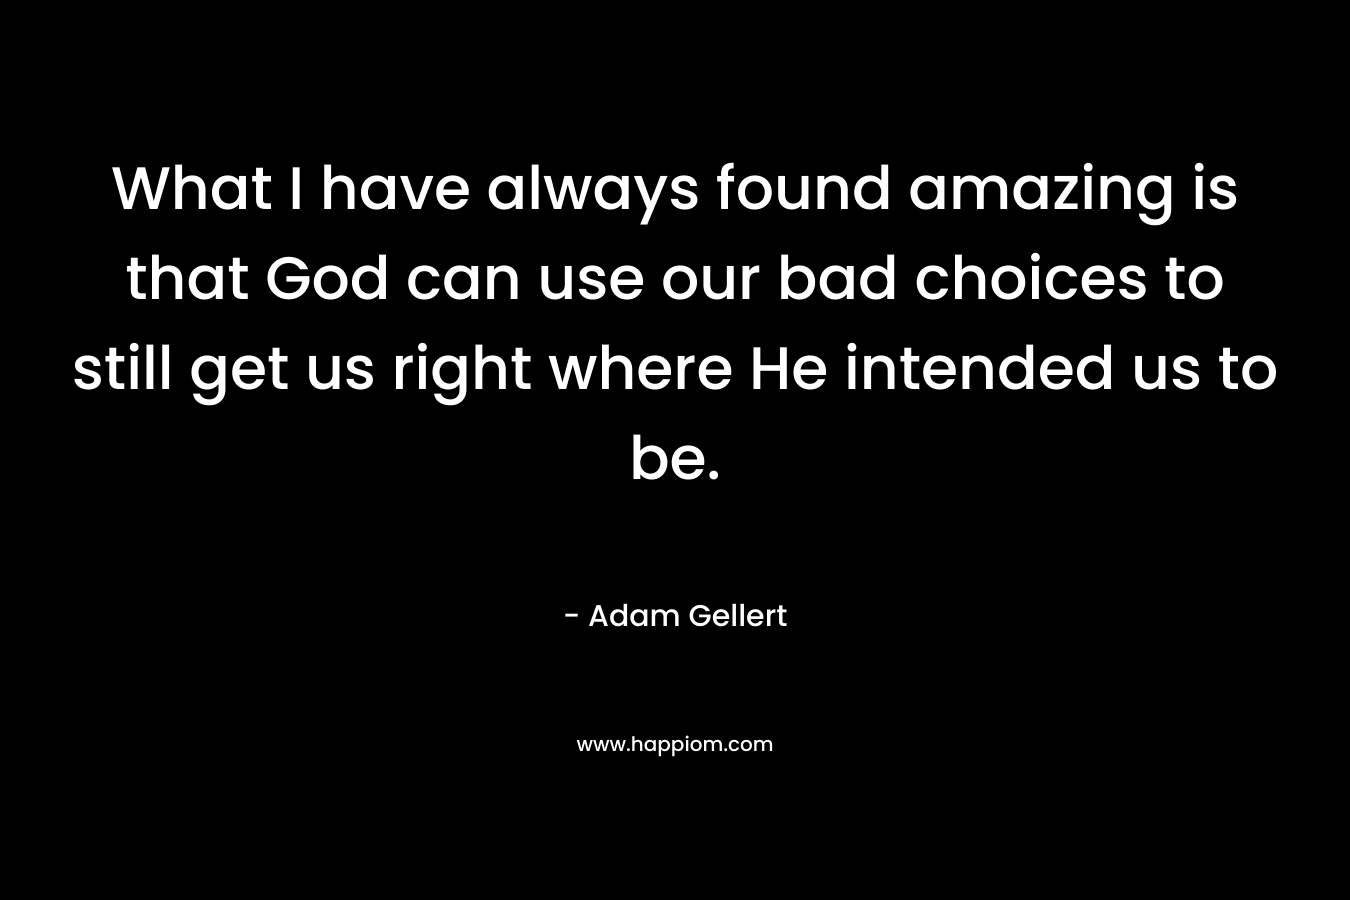 What I have always found amazing is that God can use our bad choices to still get us right where He intended us to be.